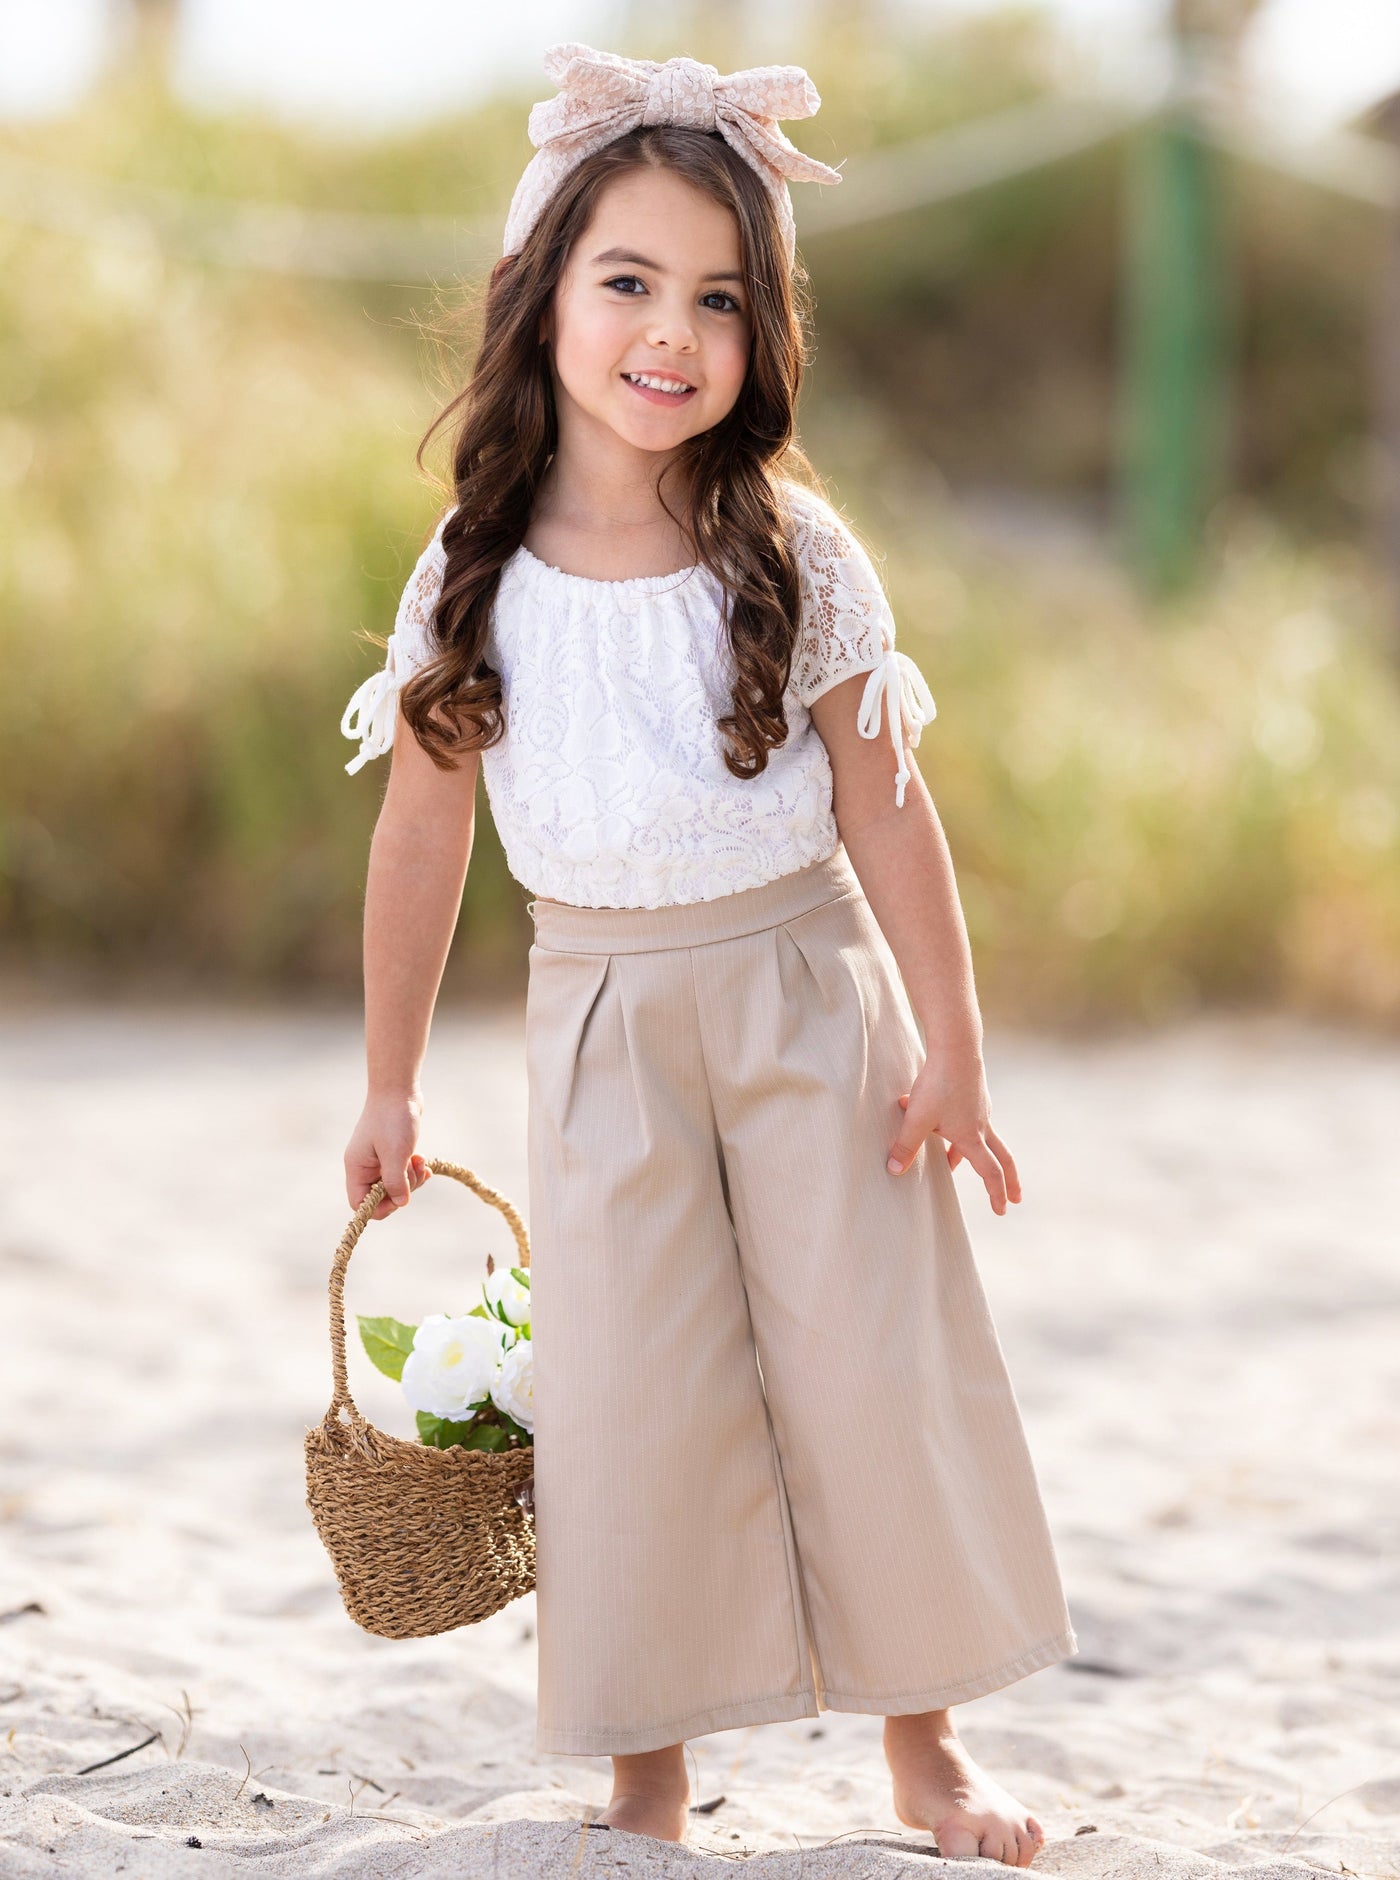 Mia Belle Girls Palazzo Pants Set | Girls Spring Outfits